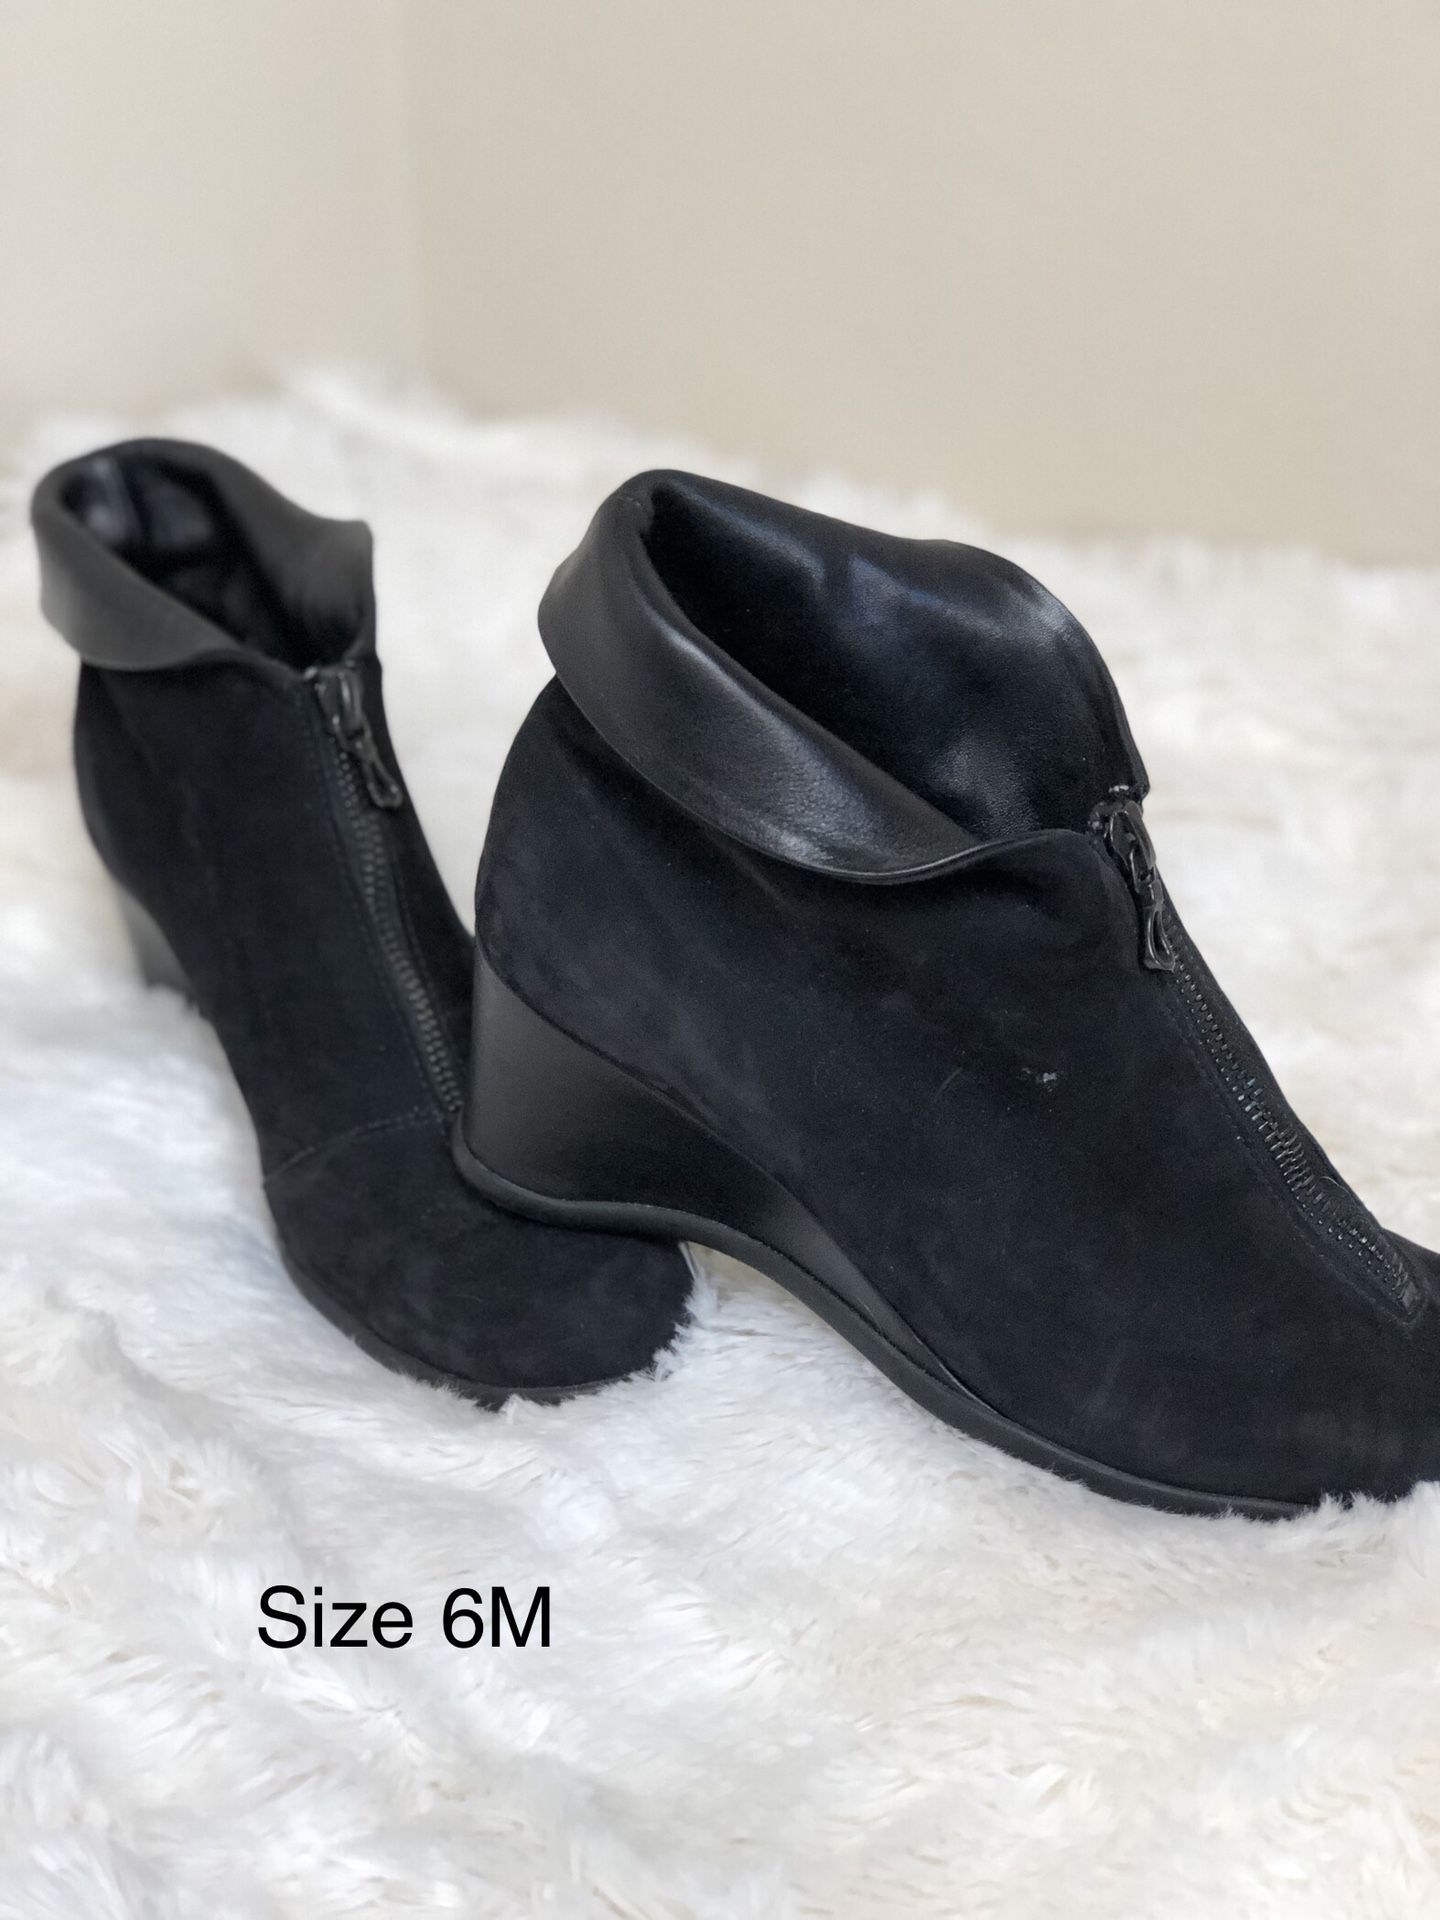 Black wedge suede boots